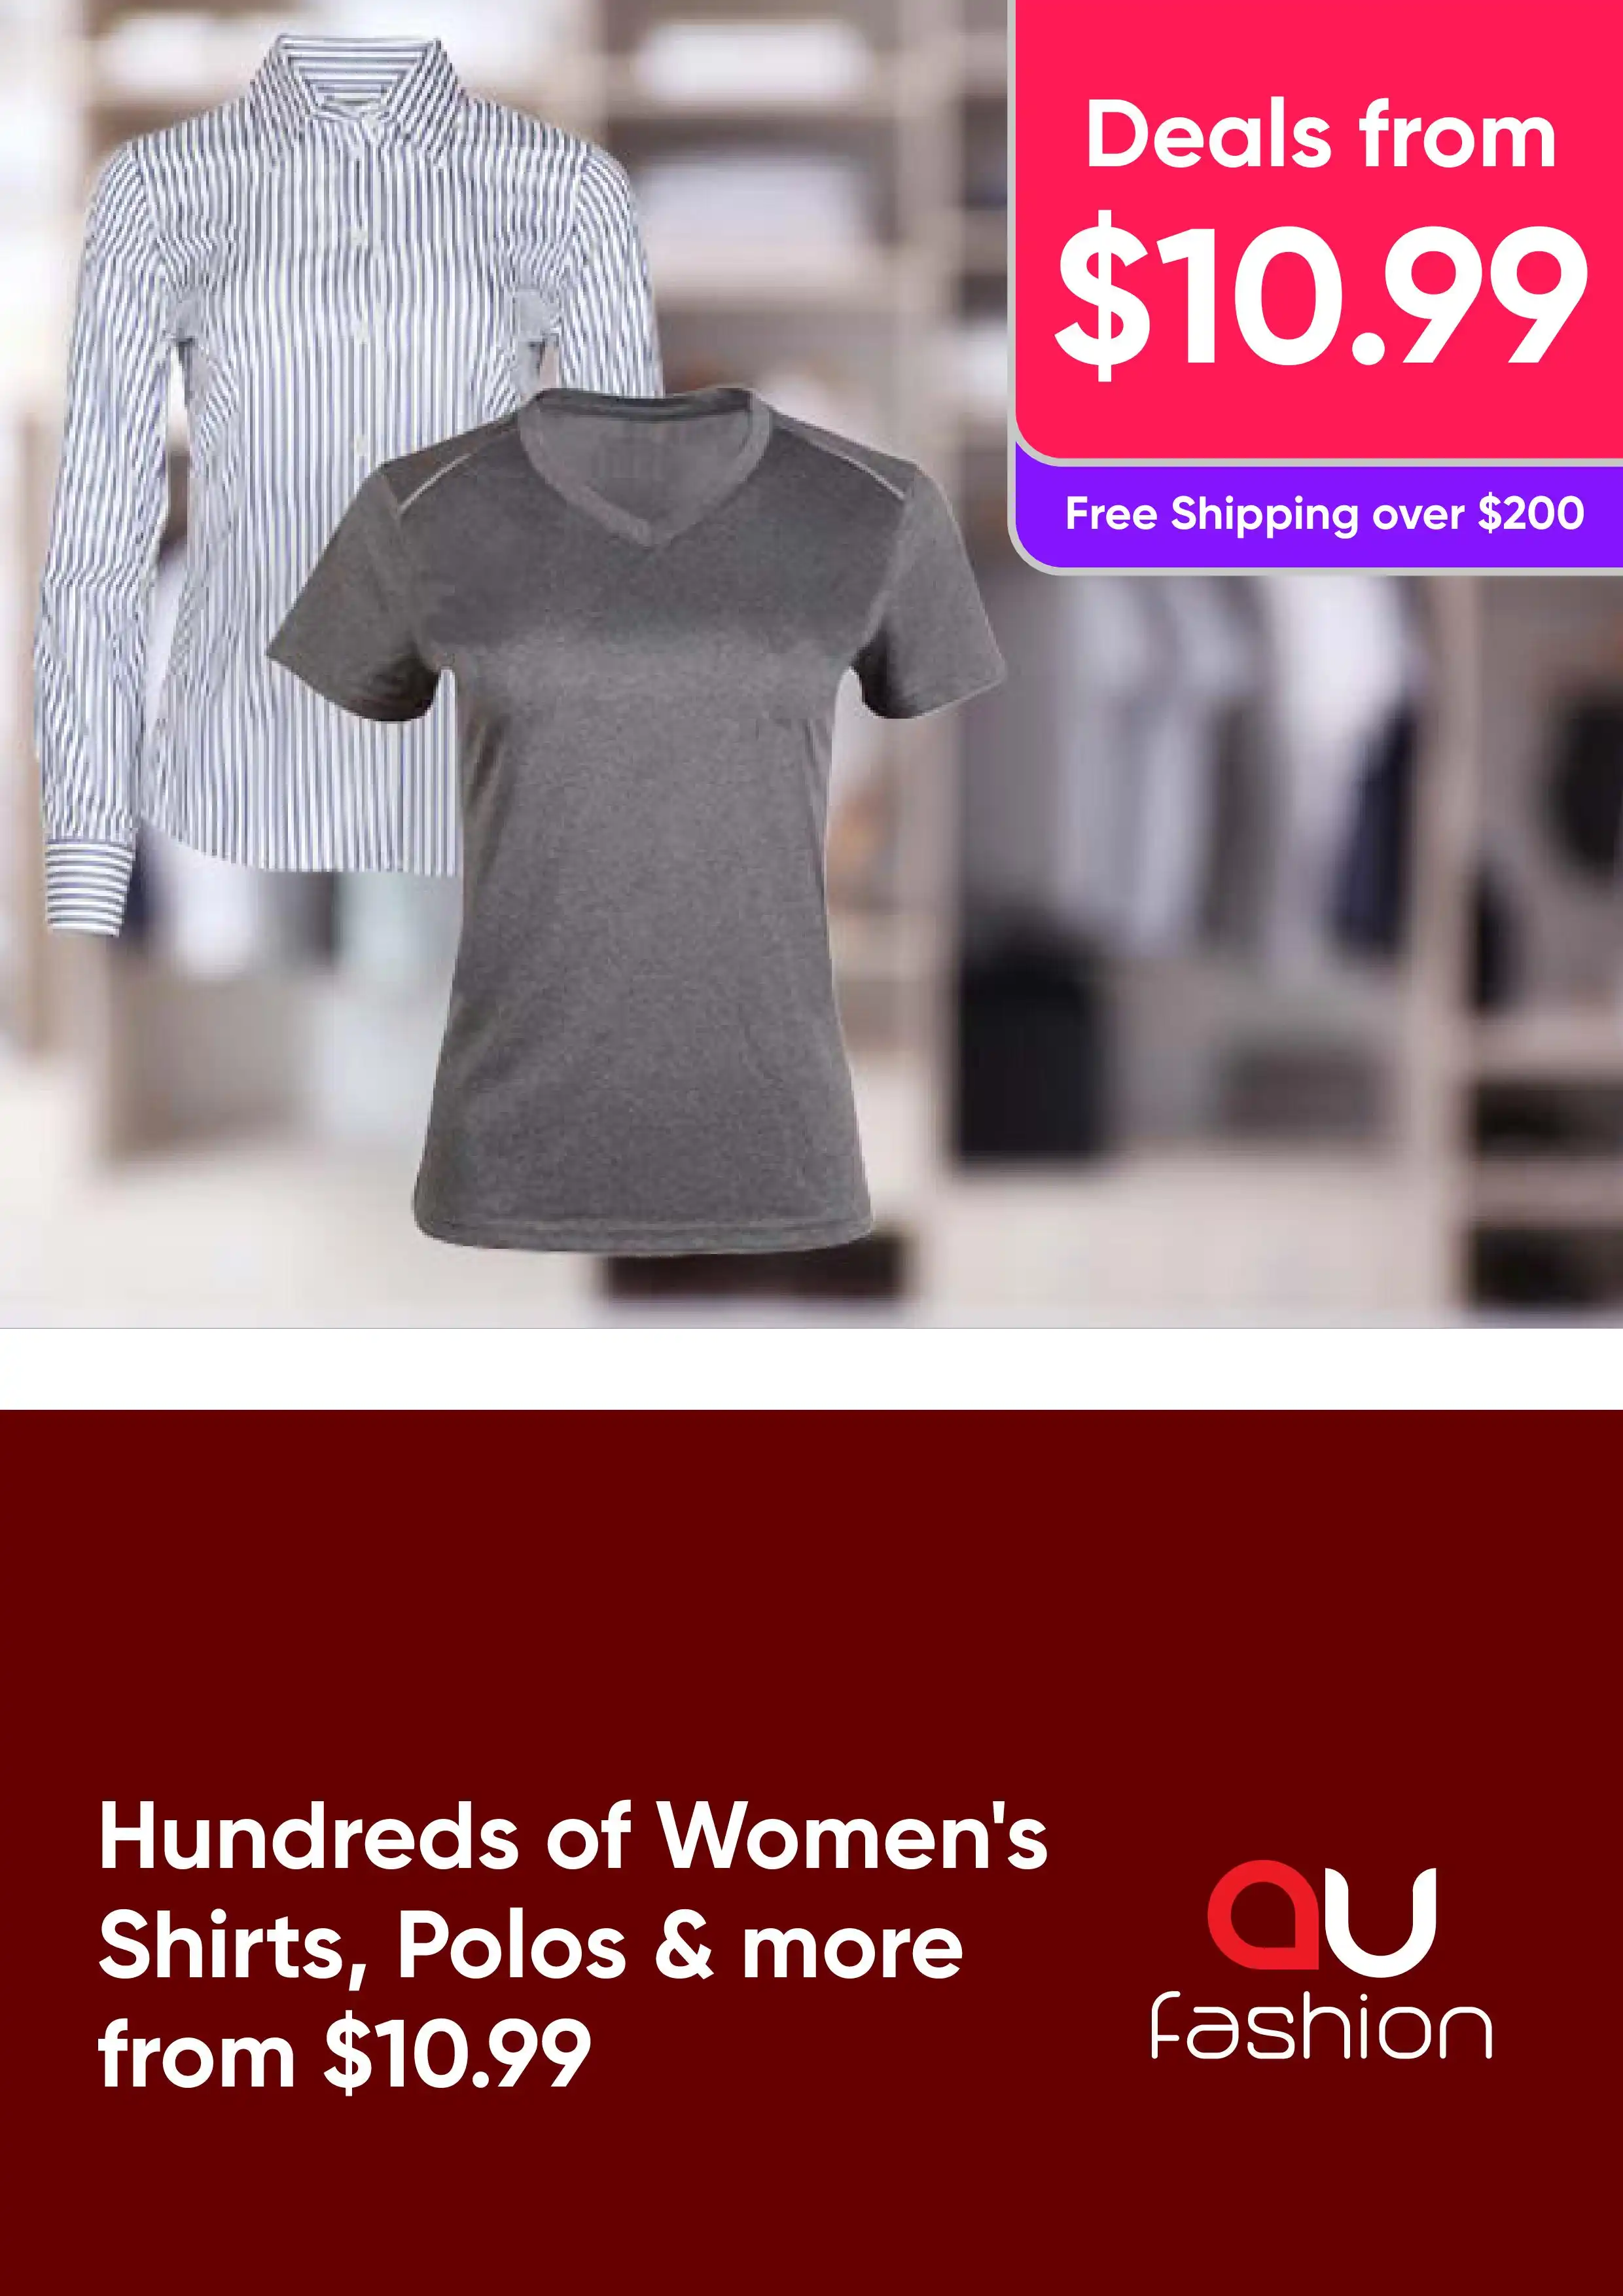 Hundreds of Womens Shirts, Polos & more from $10.99